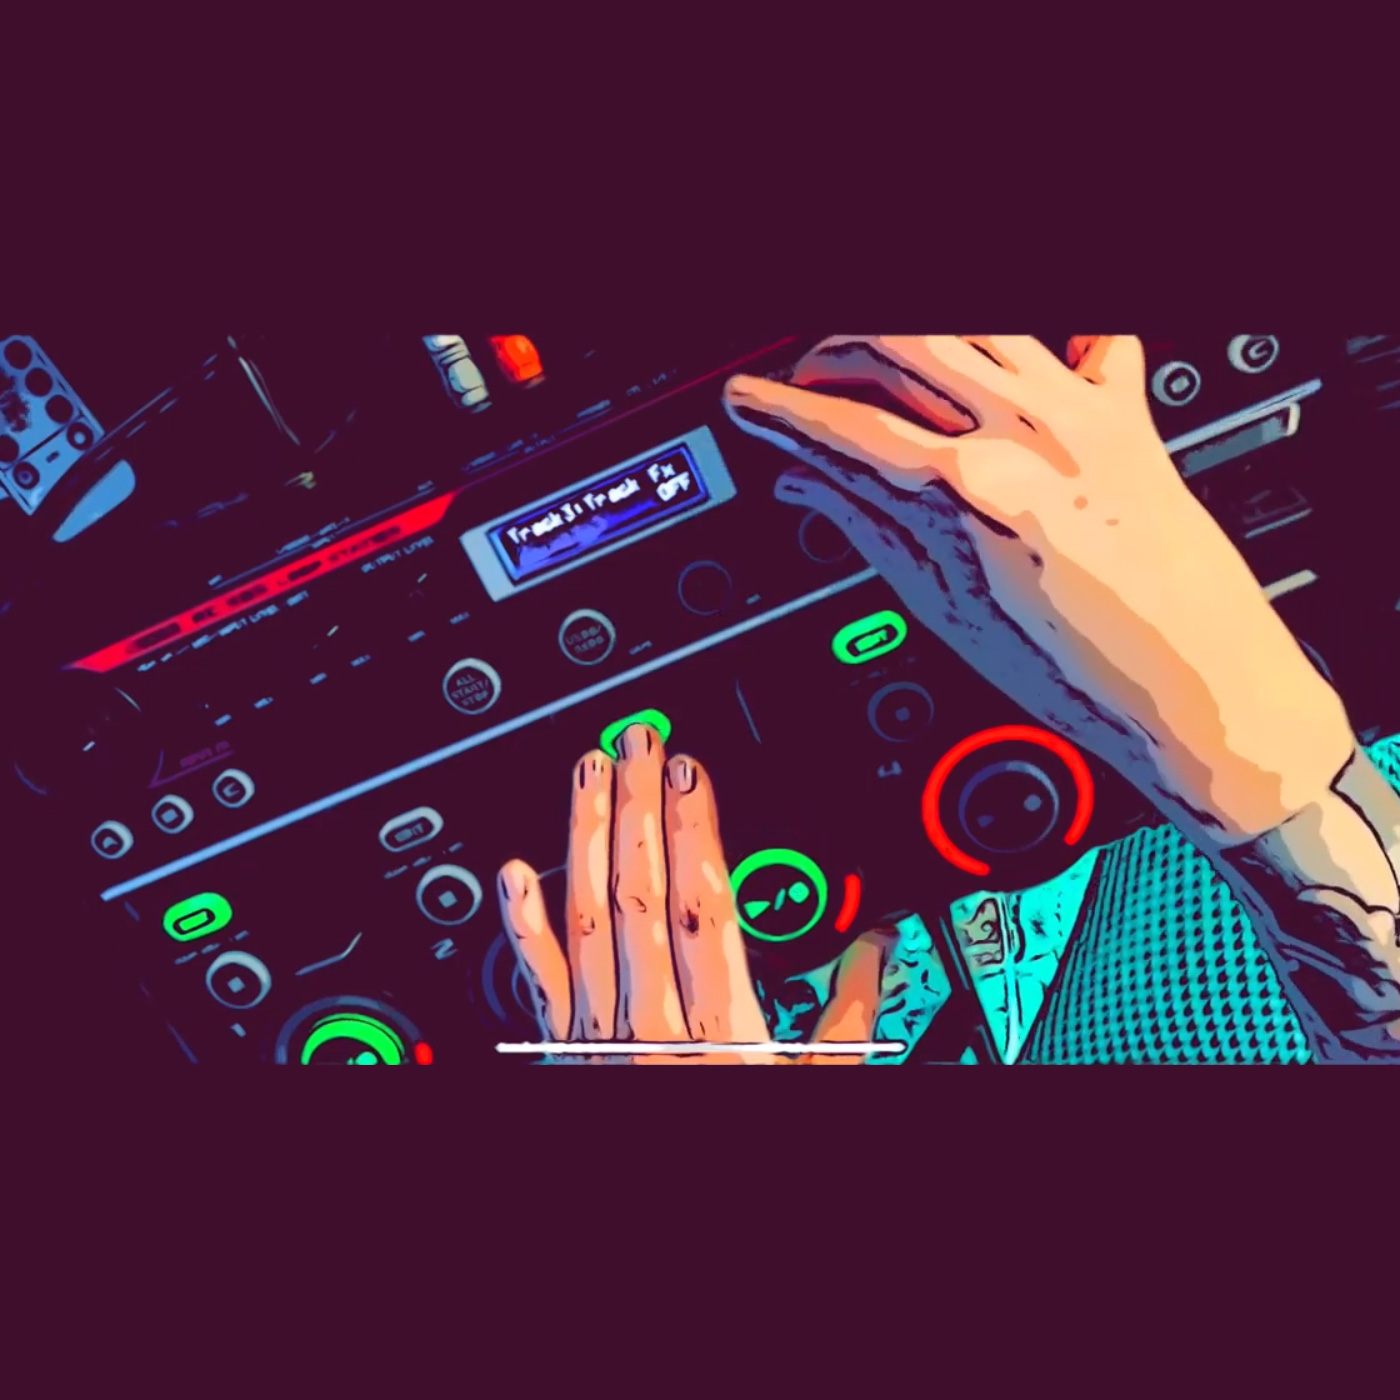 High-contrast image of two hands manipulating knobs on audio devices.